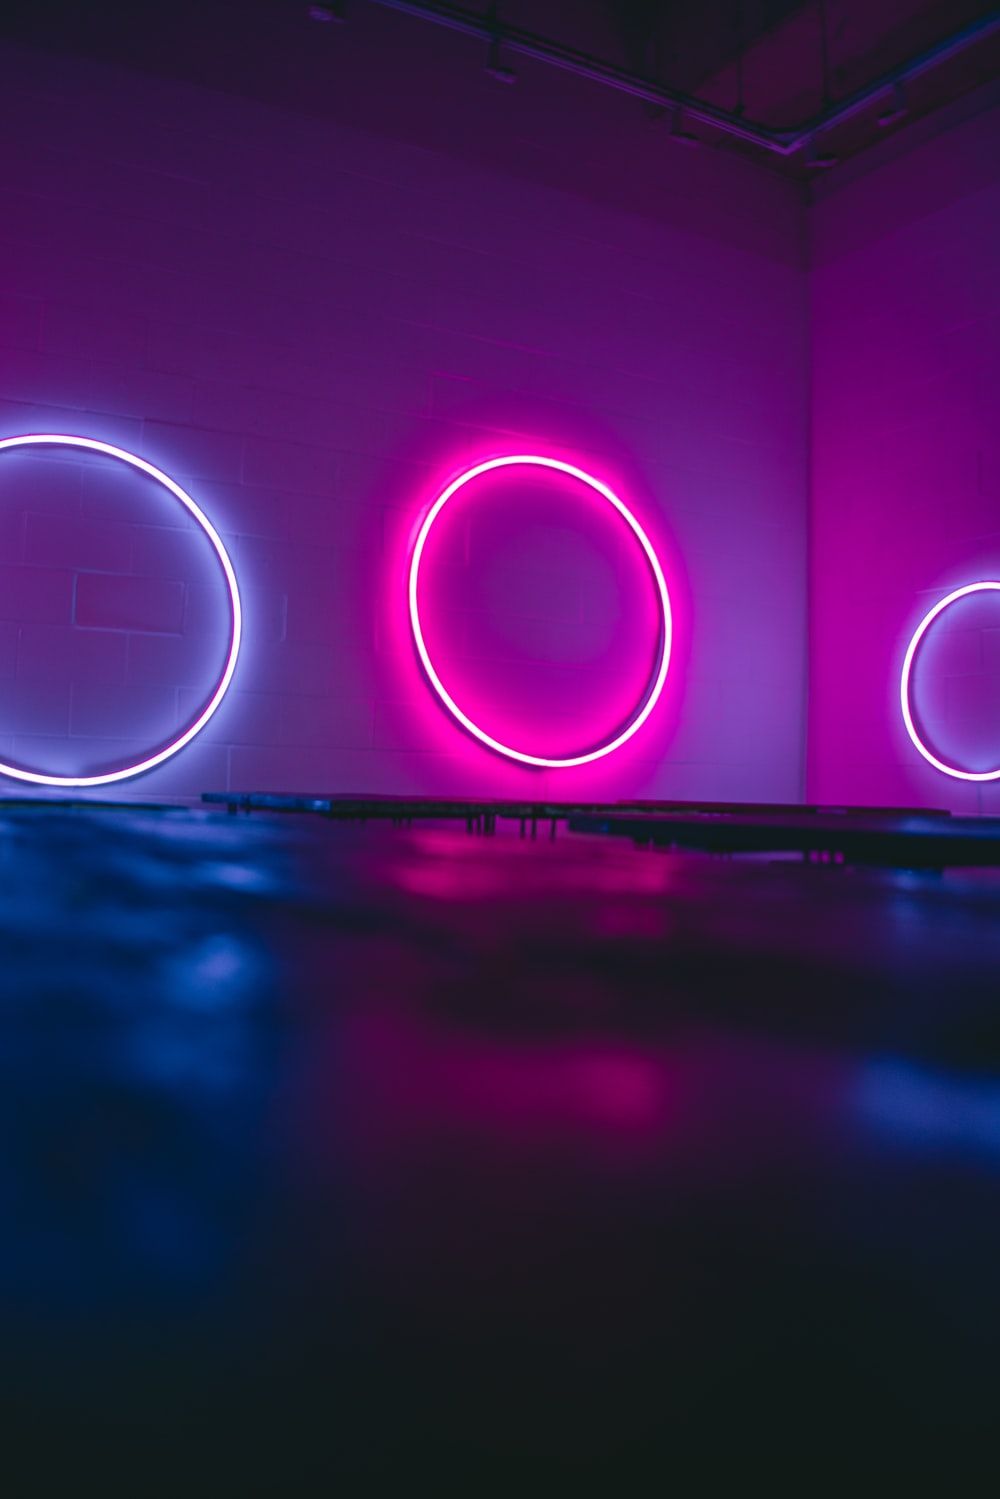 Neon Circle Picture. Download Free Image